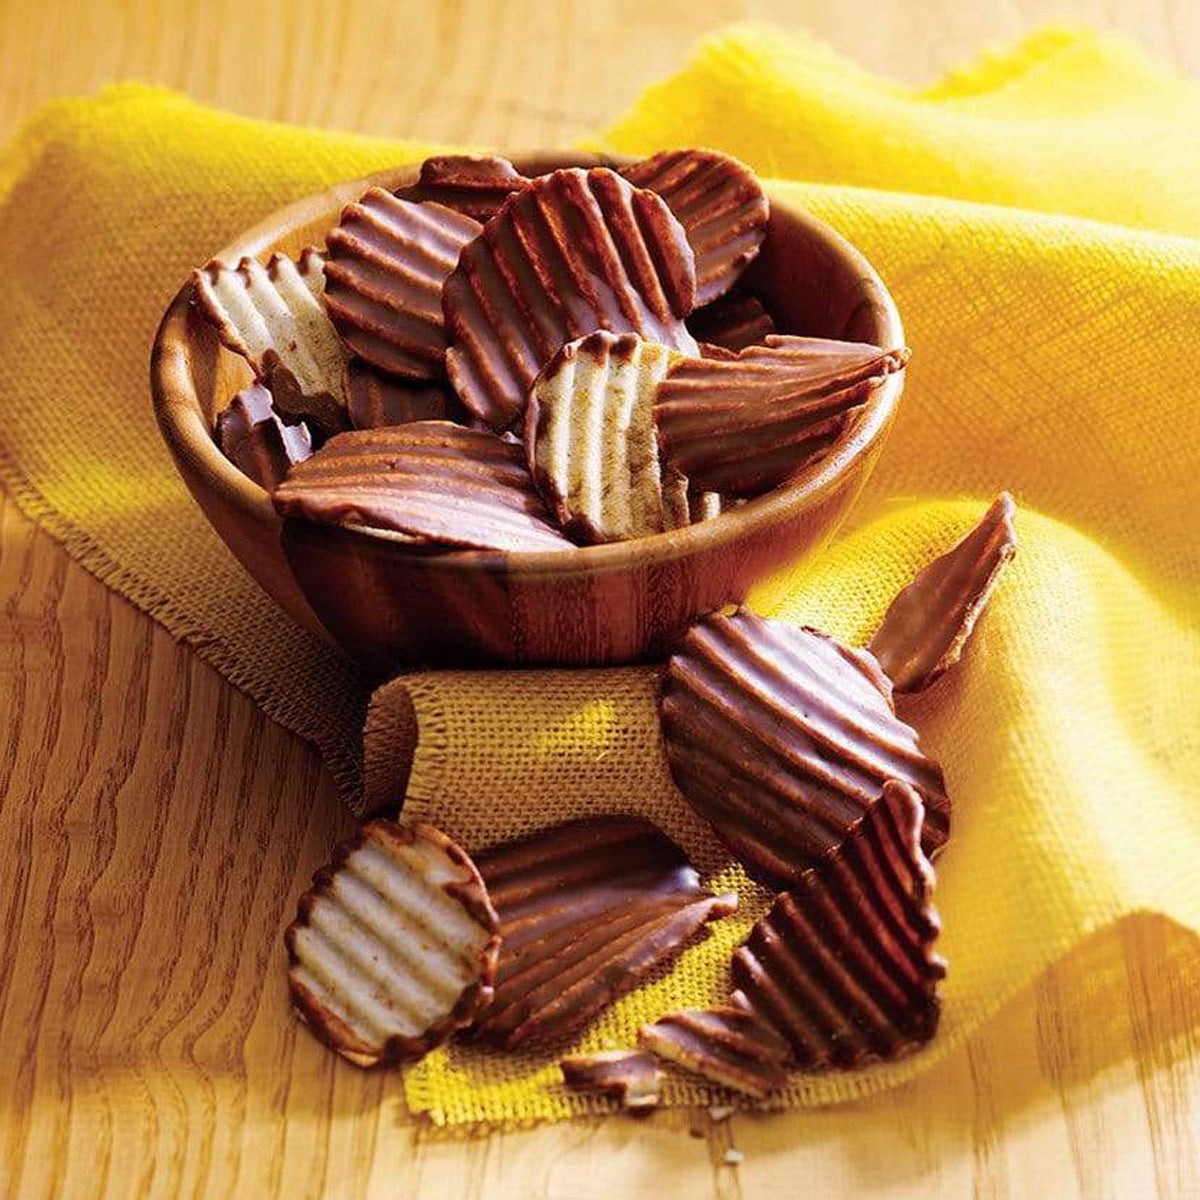 ROYCE' Chocolate - Potatochip Chocolate "Original" - Image shows brown chocolate-covered potato chips with a ridged texture, some on a yellow tablecloth, others in a wooden bowl behind. Background is wood in yellow color.